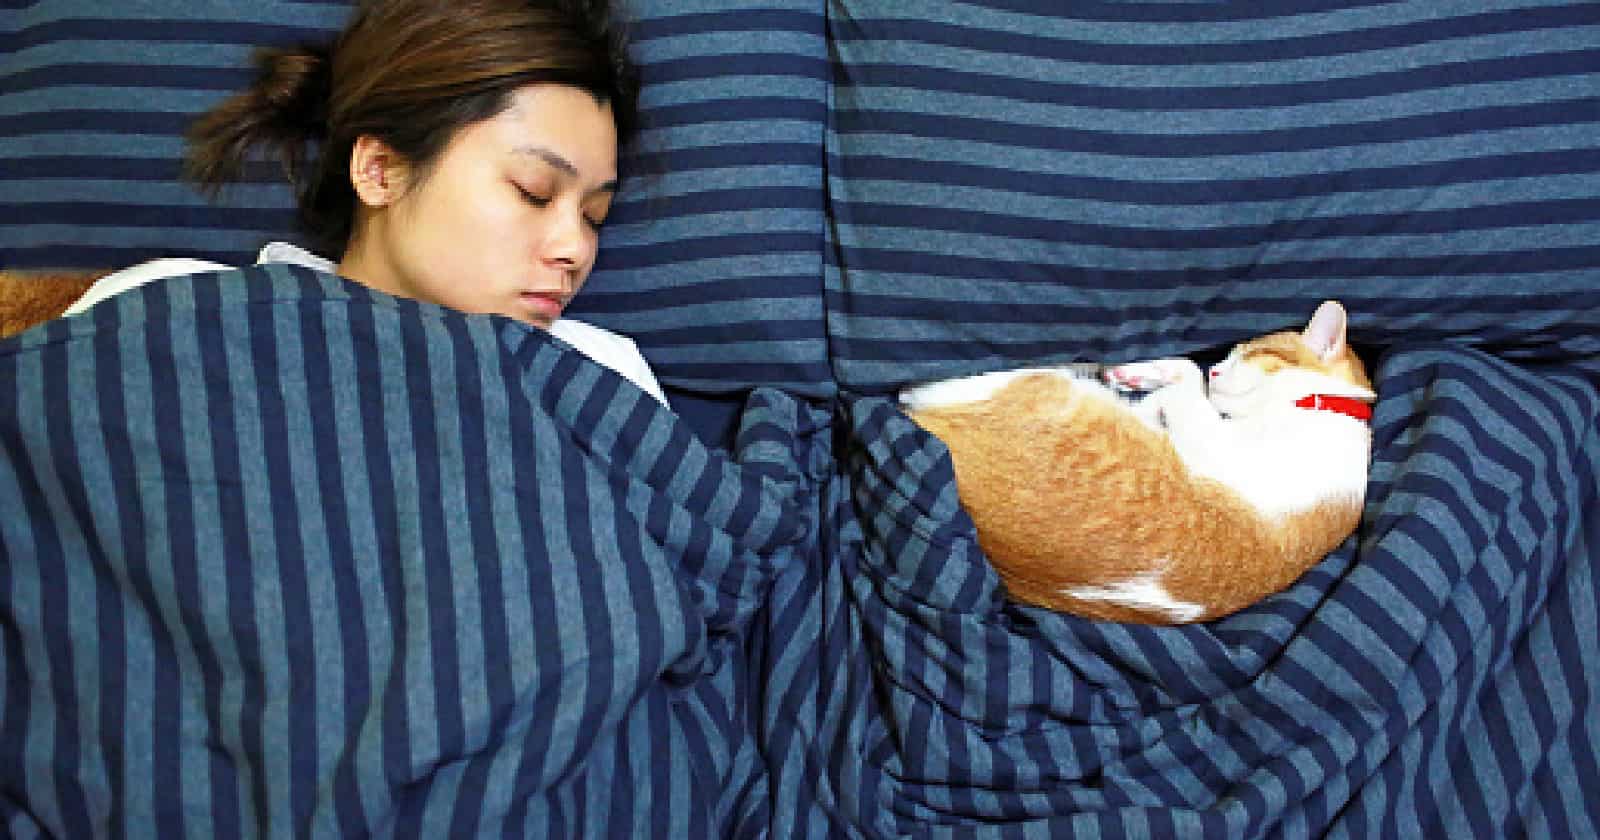 11 Fascinating Reasons Why Cats Like to Sleep With Their Owners